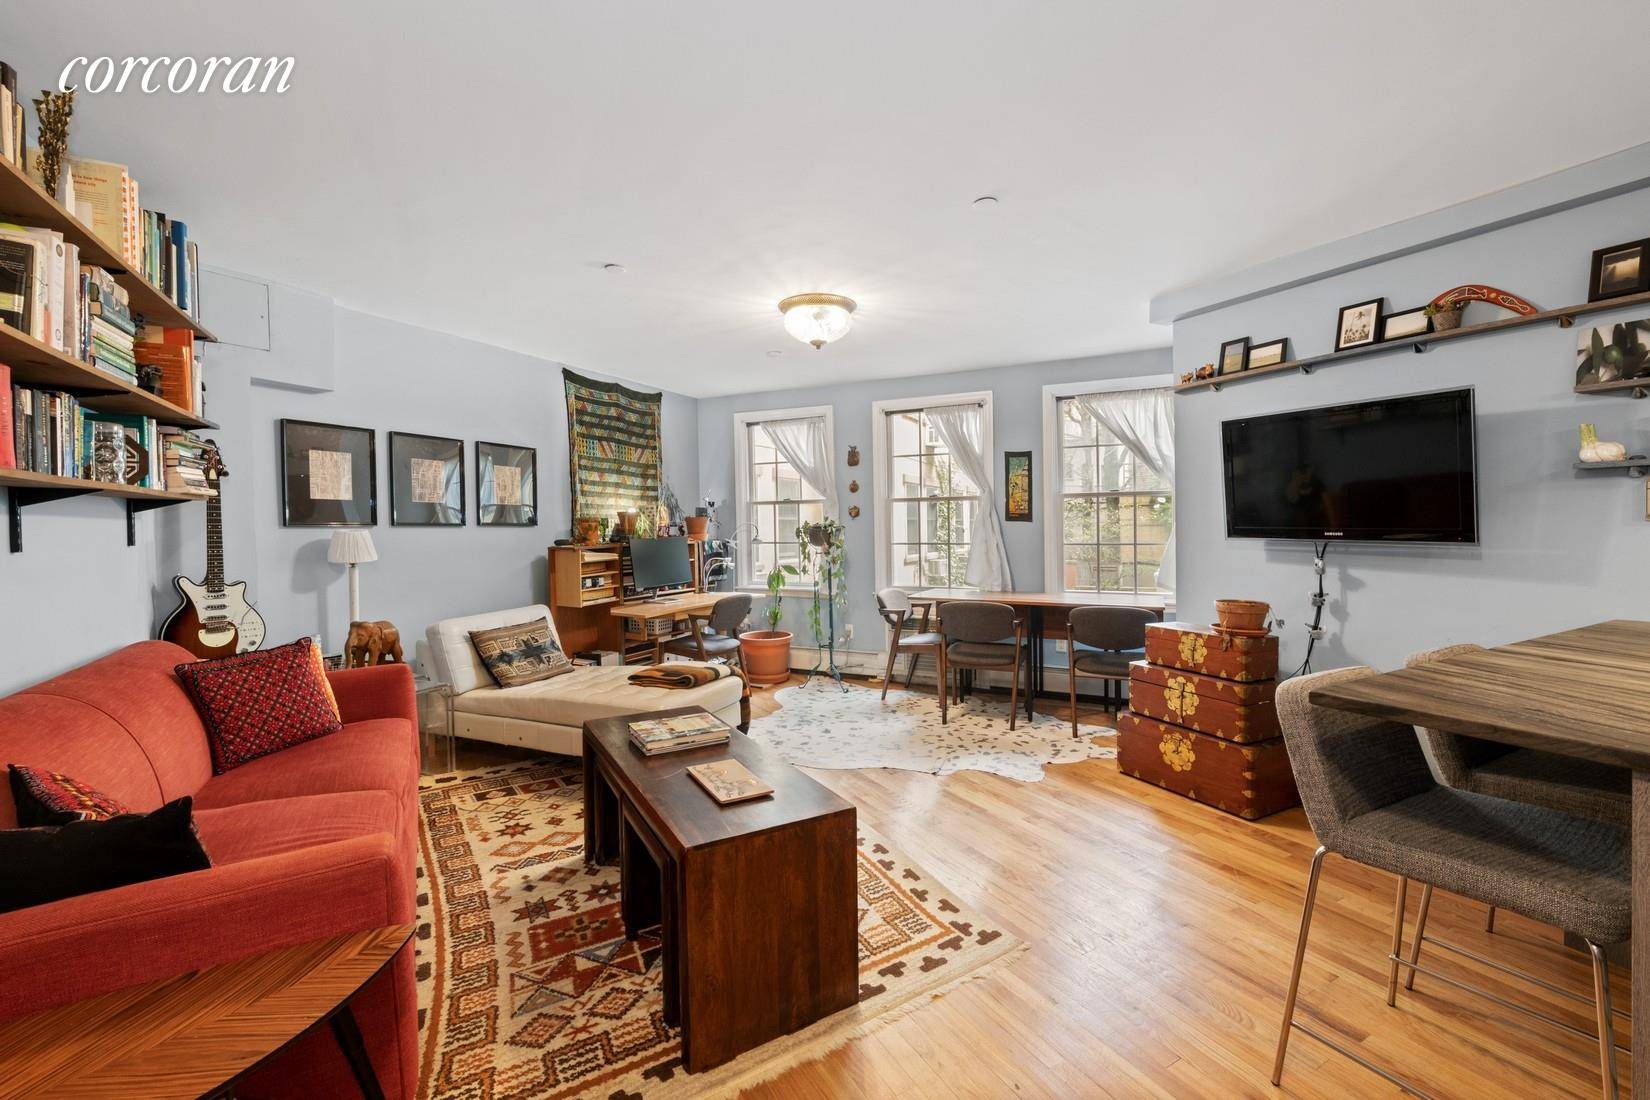 This grand one bedroom duplex offers the feel of a house, in the heart of ManhattanA s iconic East Village.